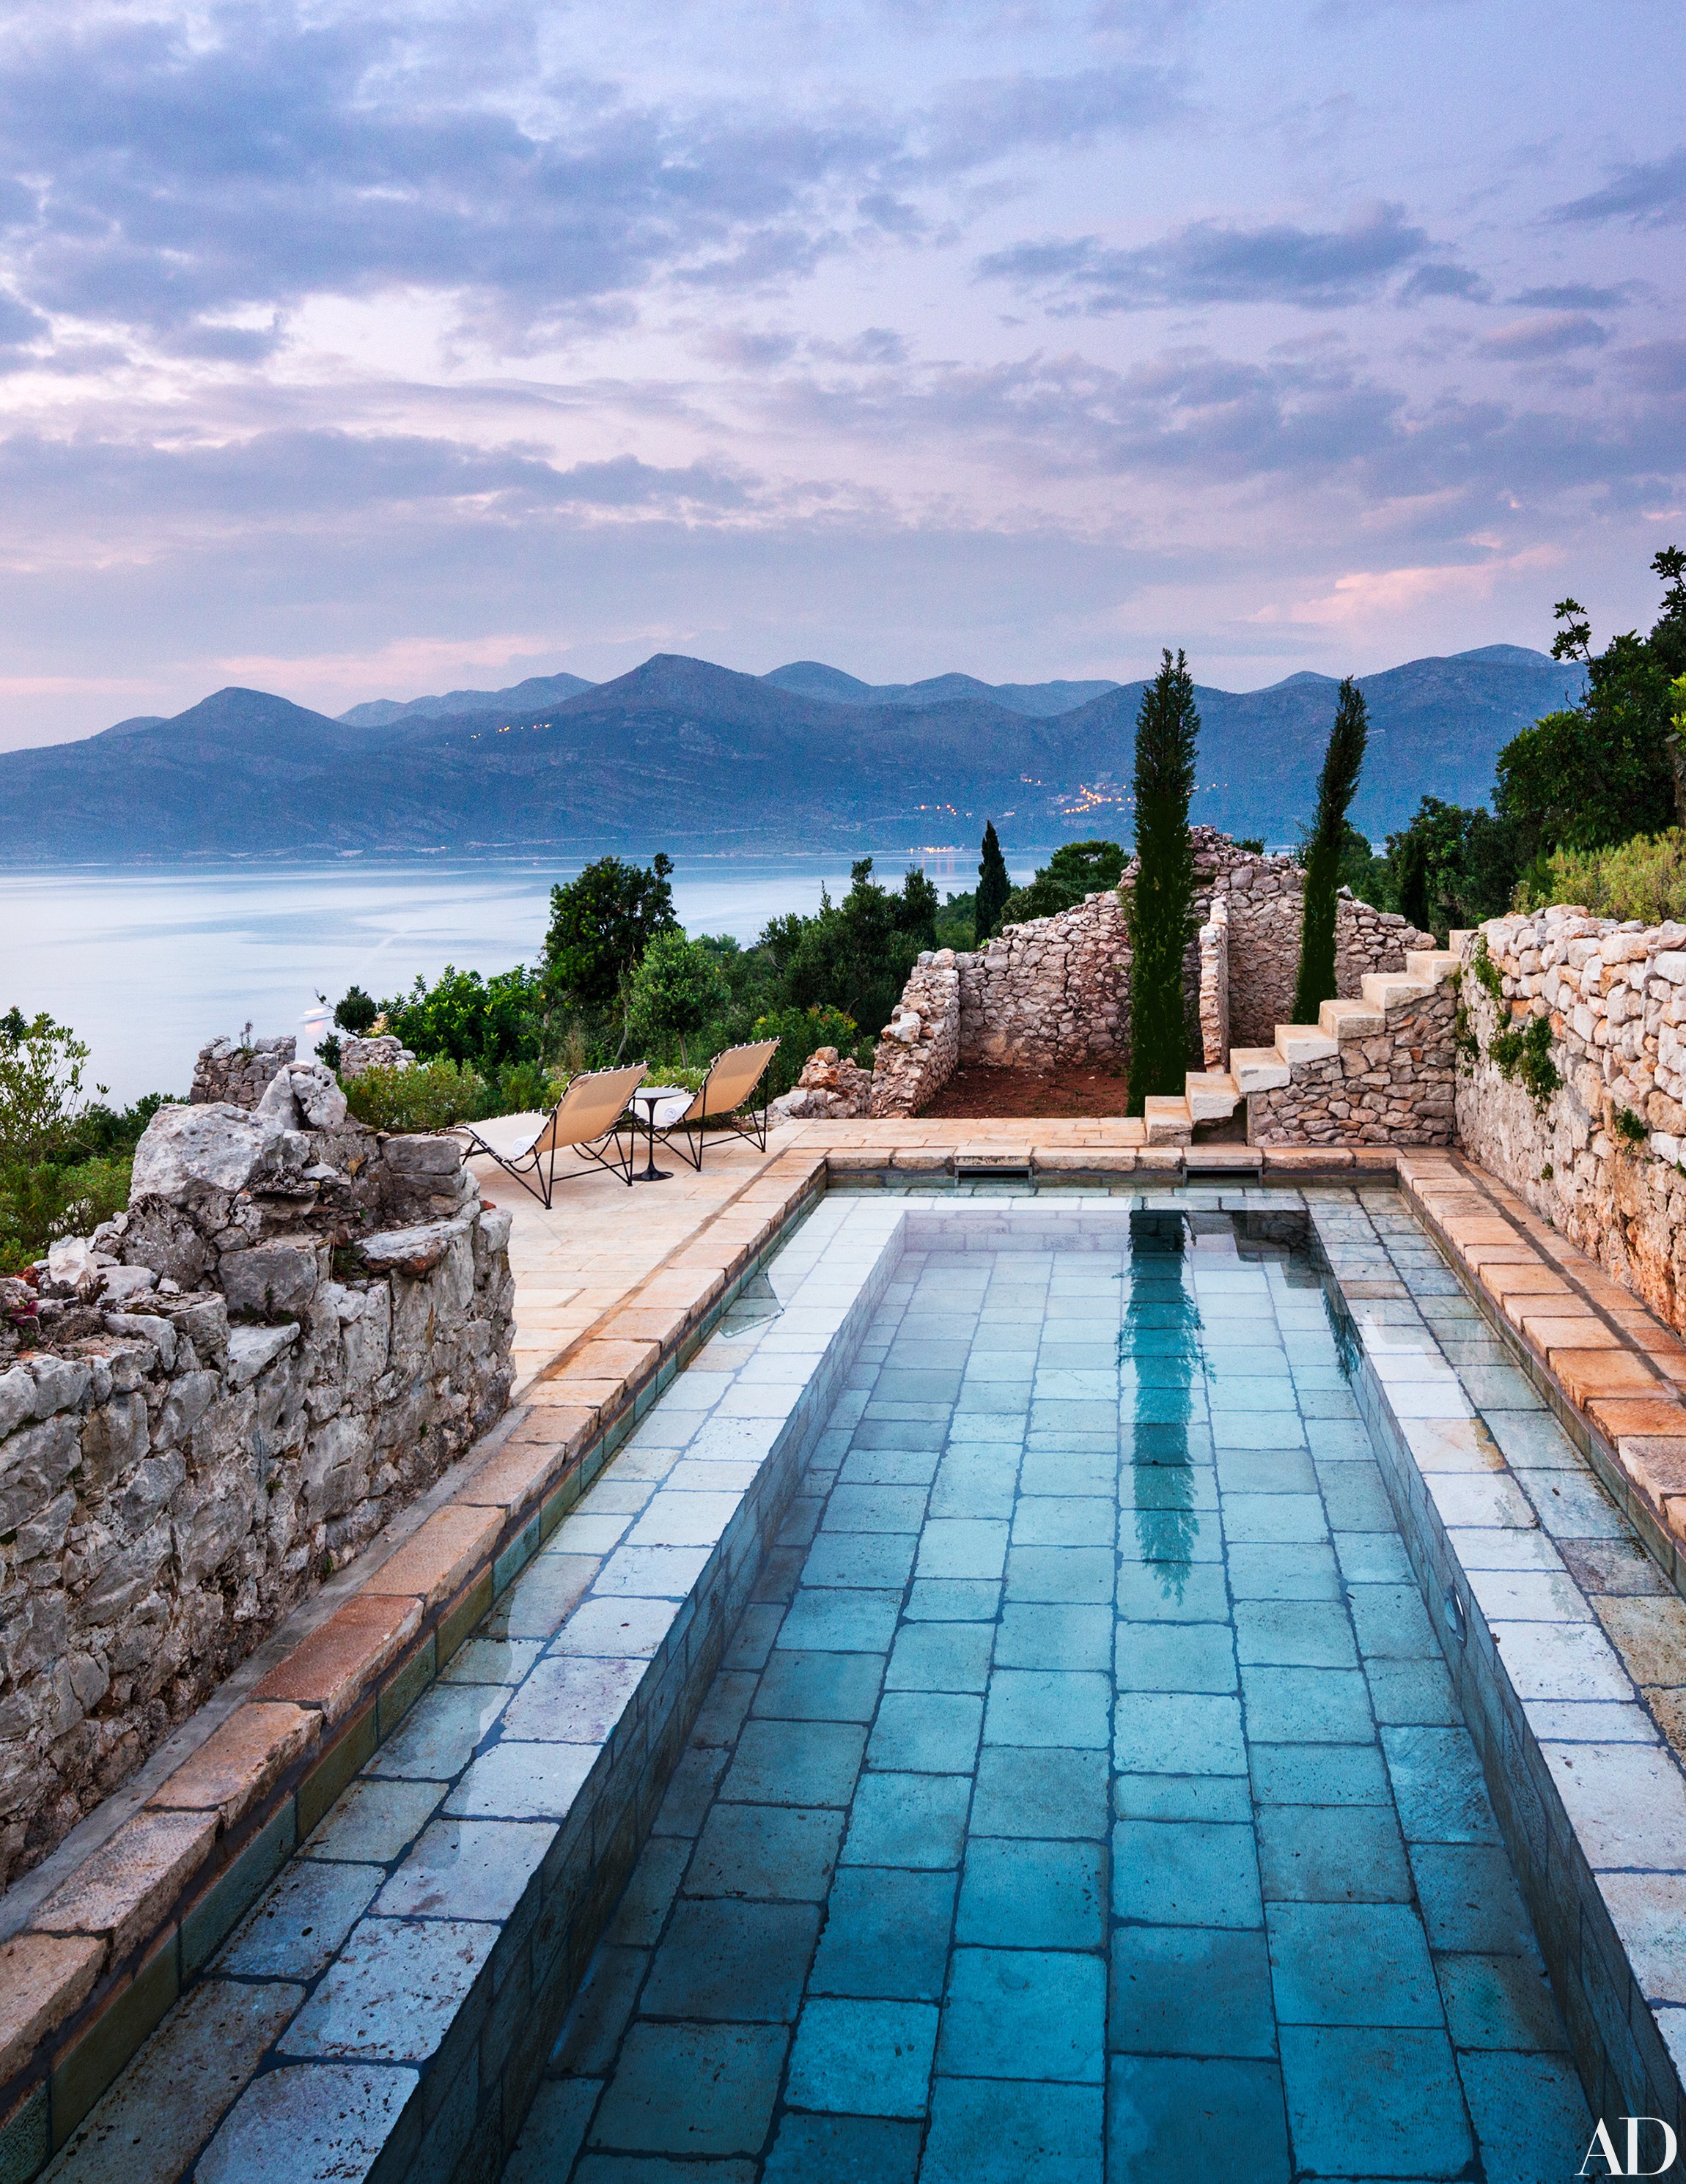 On a Croatian island in the Adriatic Sea, a stone-paved pool by David Kelly of Rees Roberts + Partners melds seamlessly with the property’s centuries-old walls.